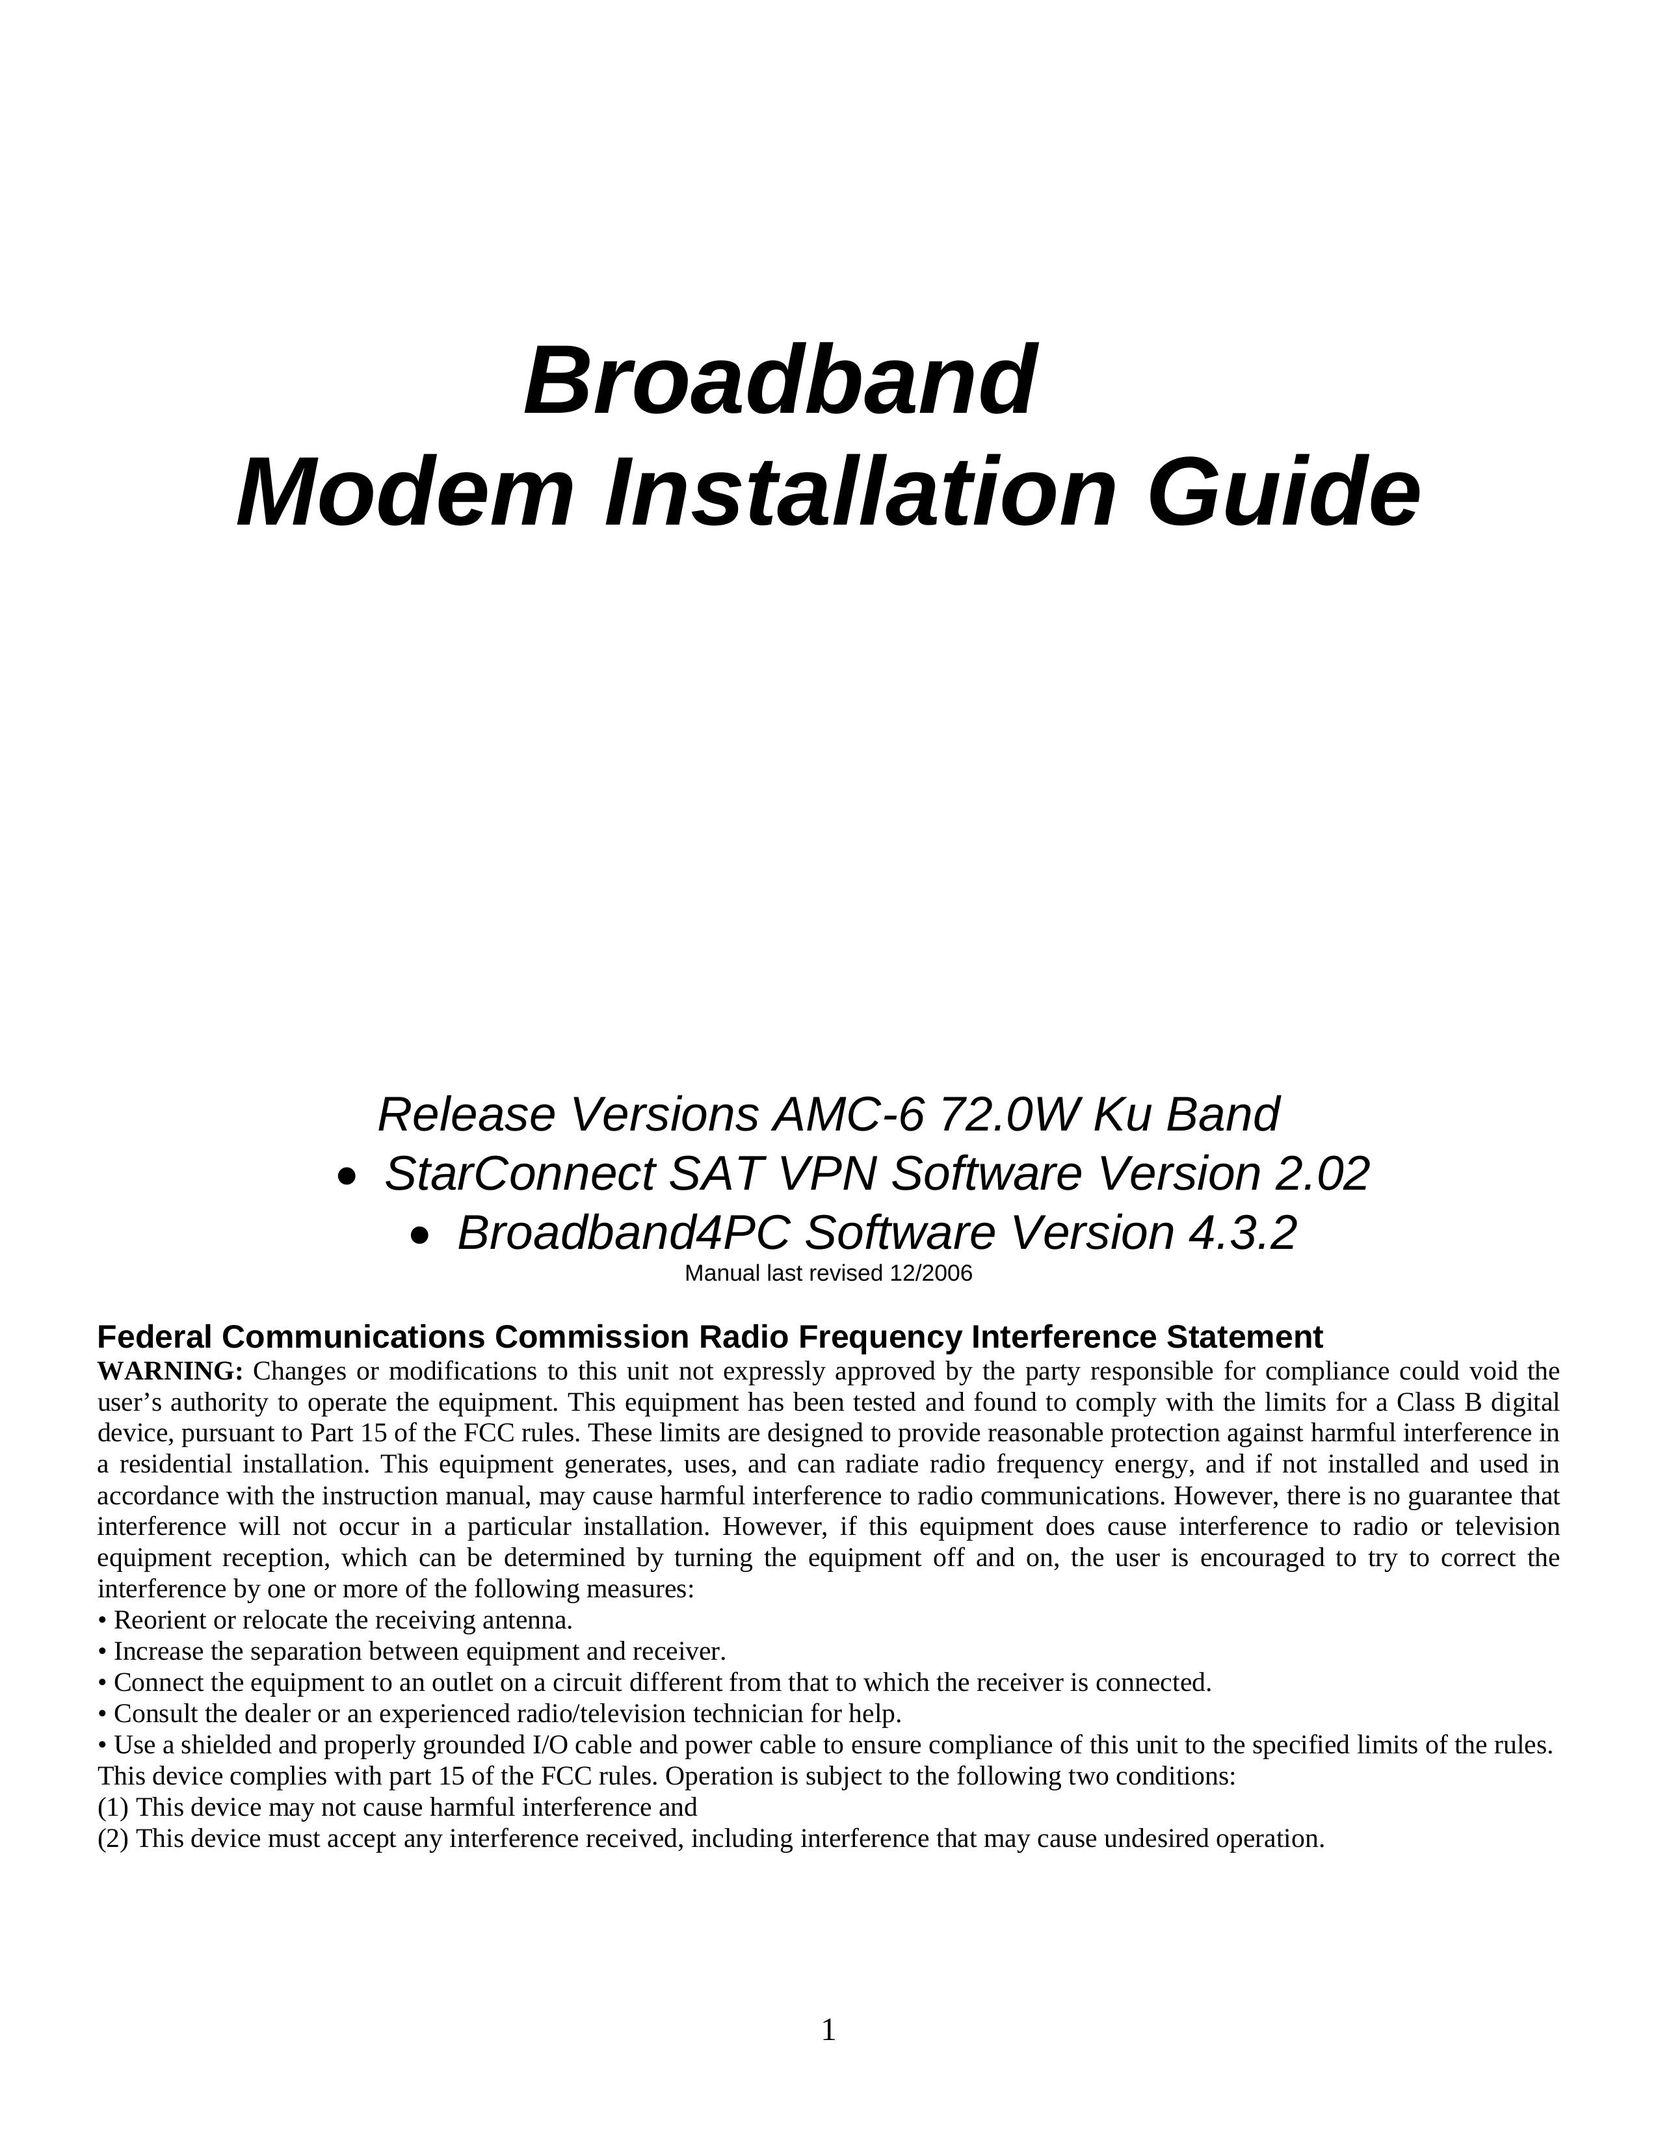 Broadband Products AMC-6 Network Router User Manual